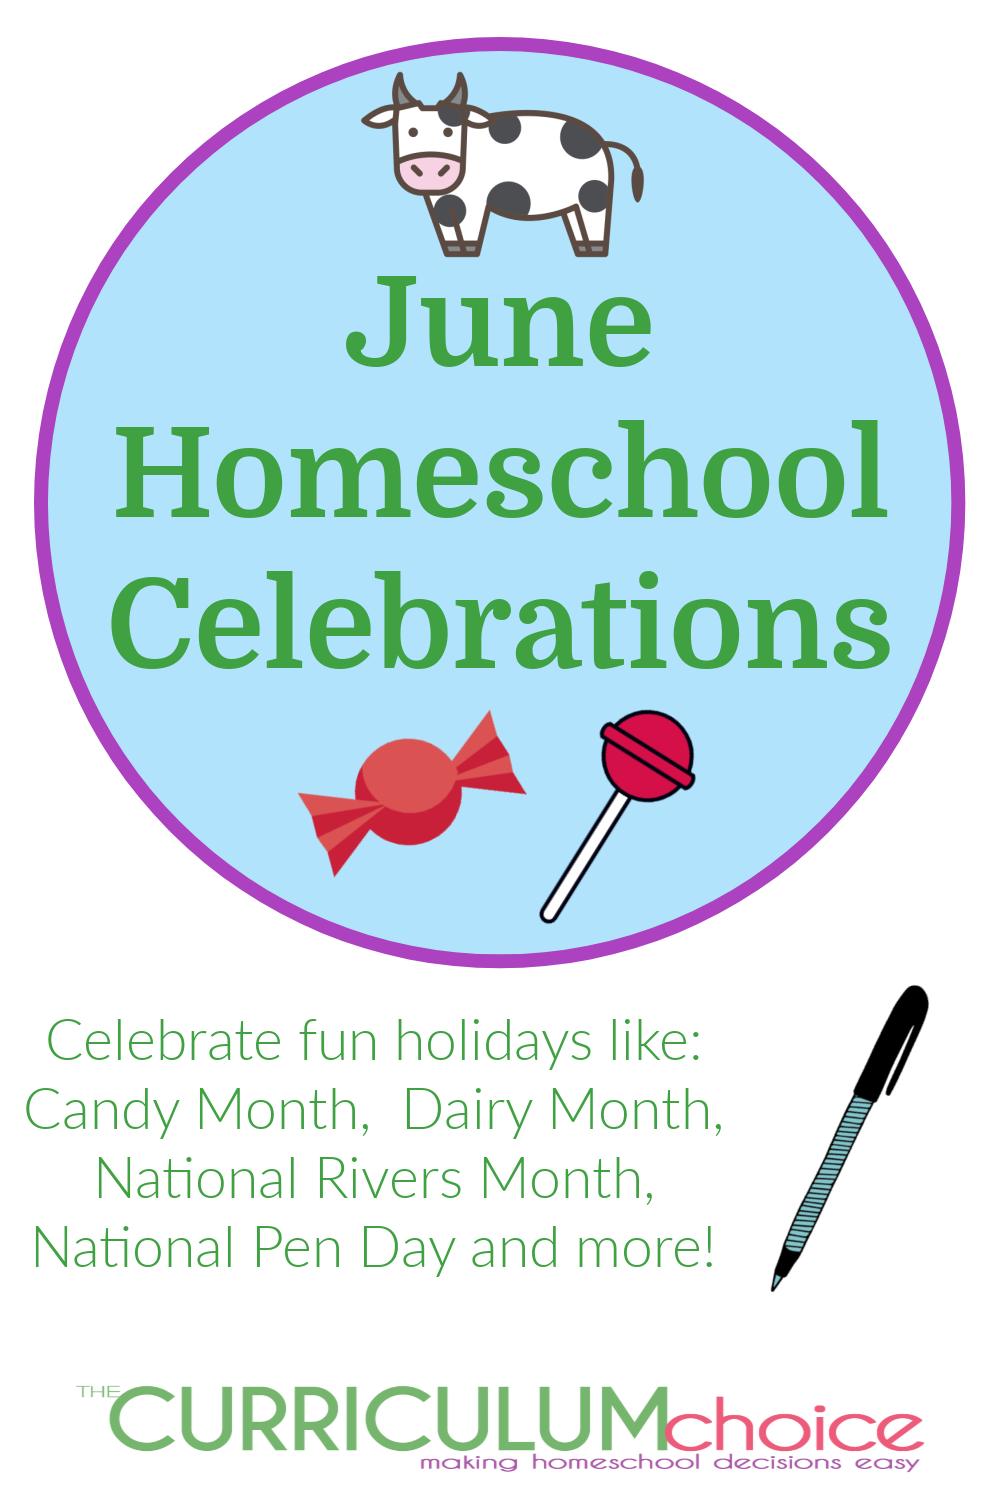 Get outside to enjoy the outdoors; make snacks, read books and check out these June Homeschool Celebrations. Like Candy Month, National Pen Day and more!